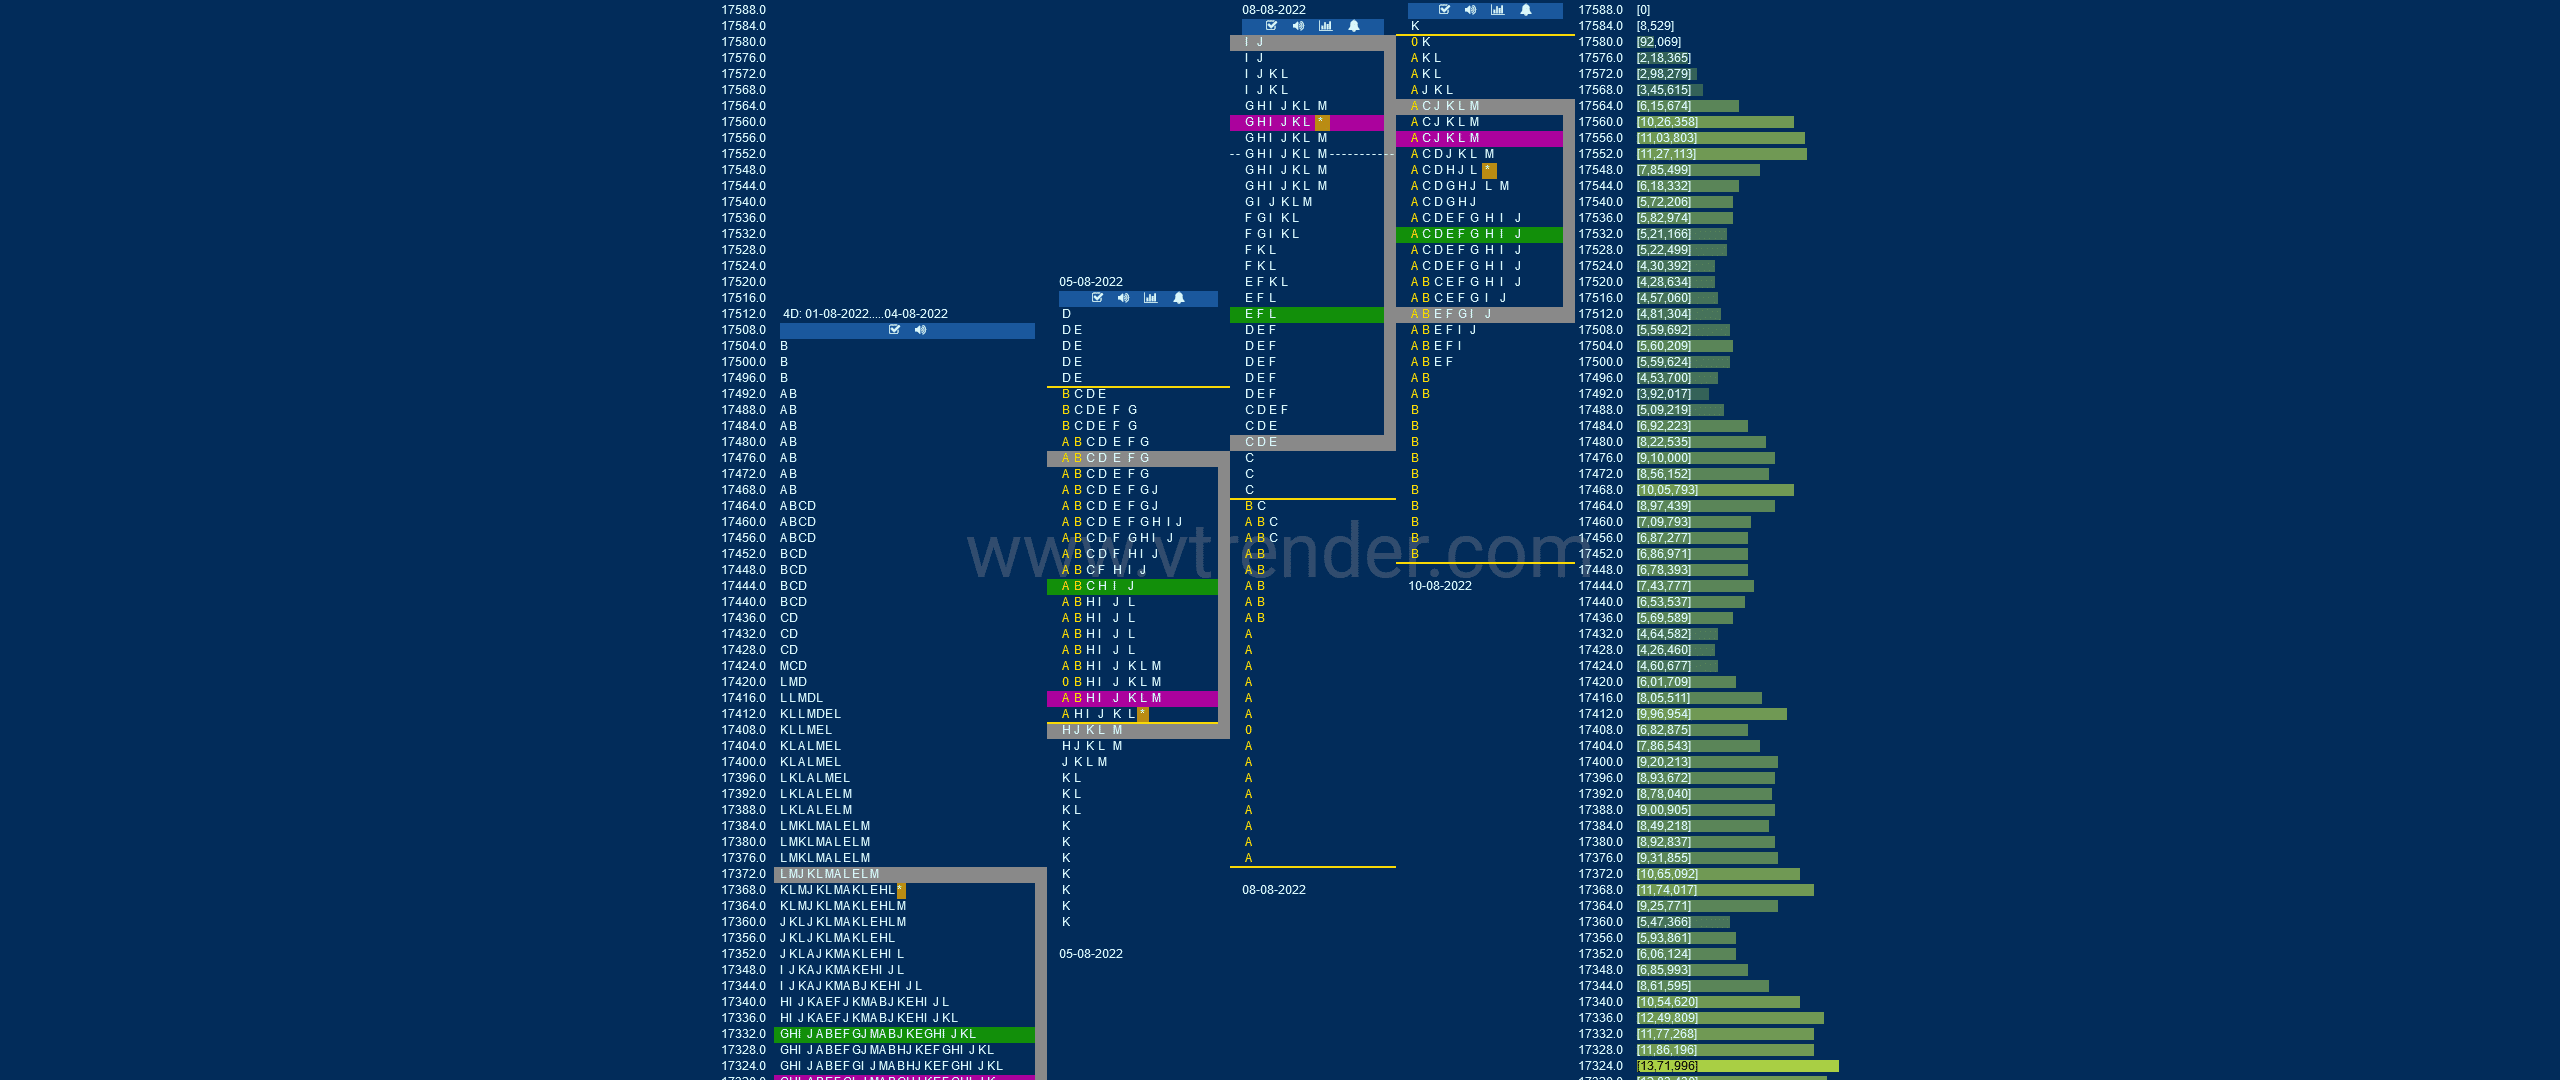 Nf 7 Market Profile Analysis Dated 10Th Aug 2022 Banknifty Futures, Charts, Day Trading, Intraday Trading, Intraday Trading Strategies, Market Profile, Market Profile Trading Strategies, Nifty Futures, Order Flow Analysis, Support And Resistance, Technical Analysis, Trading Strategies, Volume Profile Trading